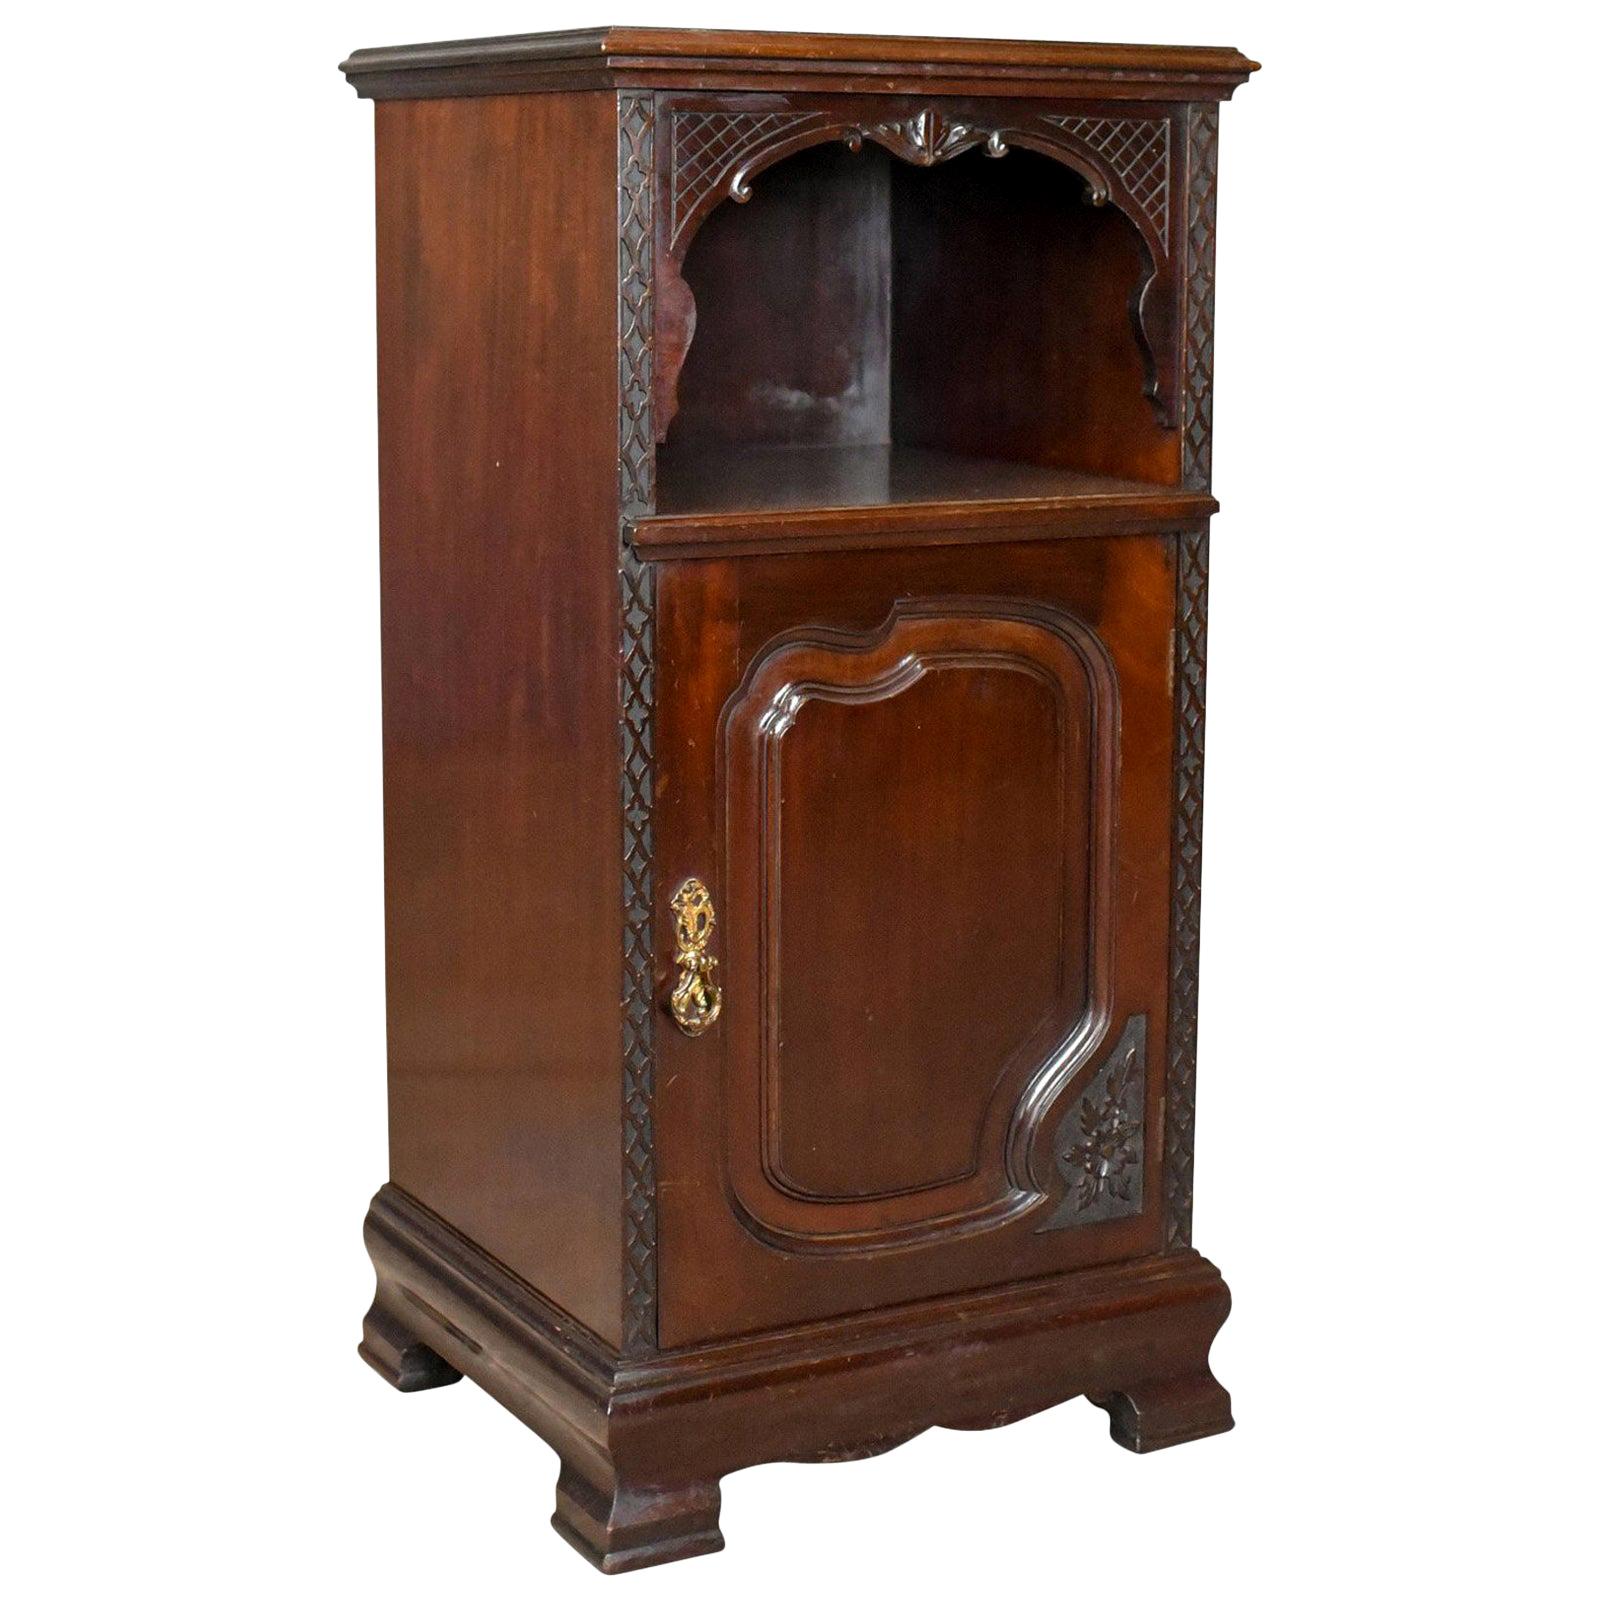 Antique Bedside Cabinet, Carved Mahogany Nightstand, English, circa 1910